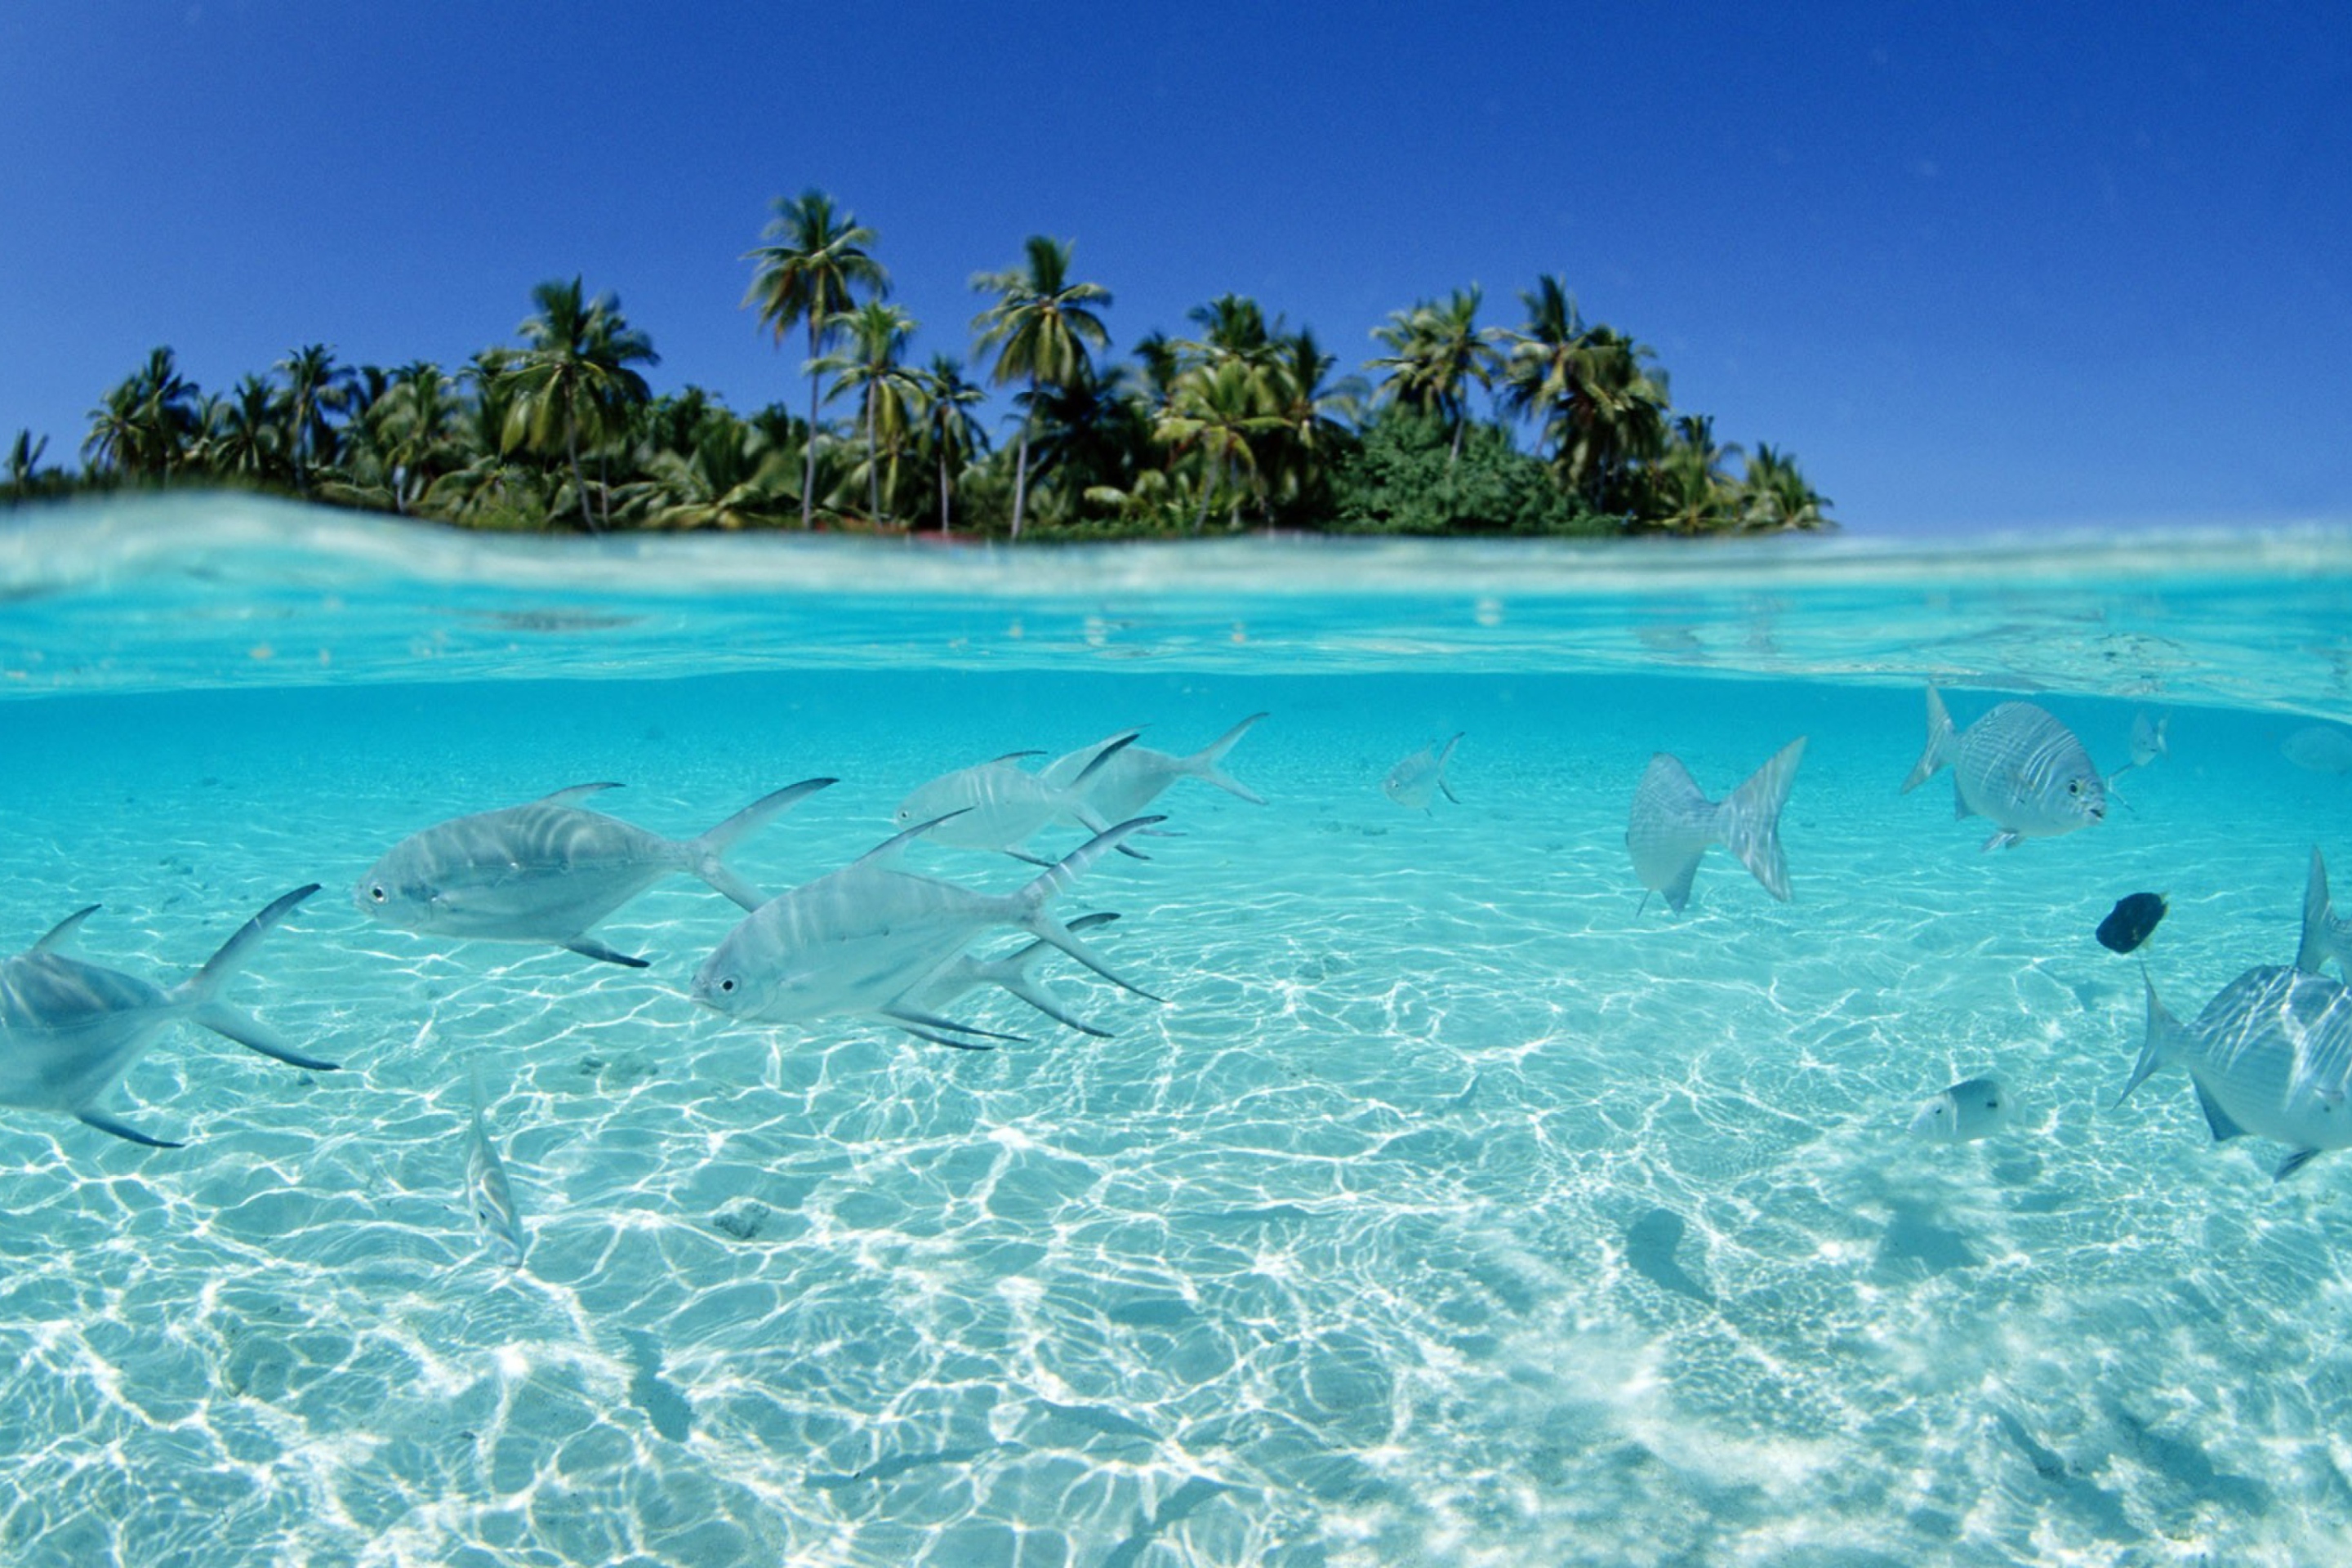 Tropical Island And Fish In Blue Sea wallpaper 2880x1920